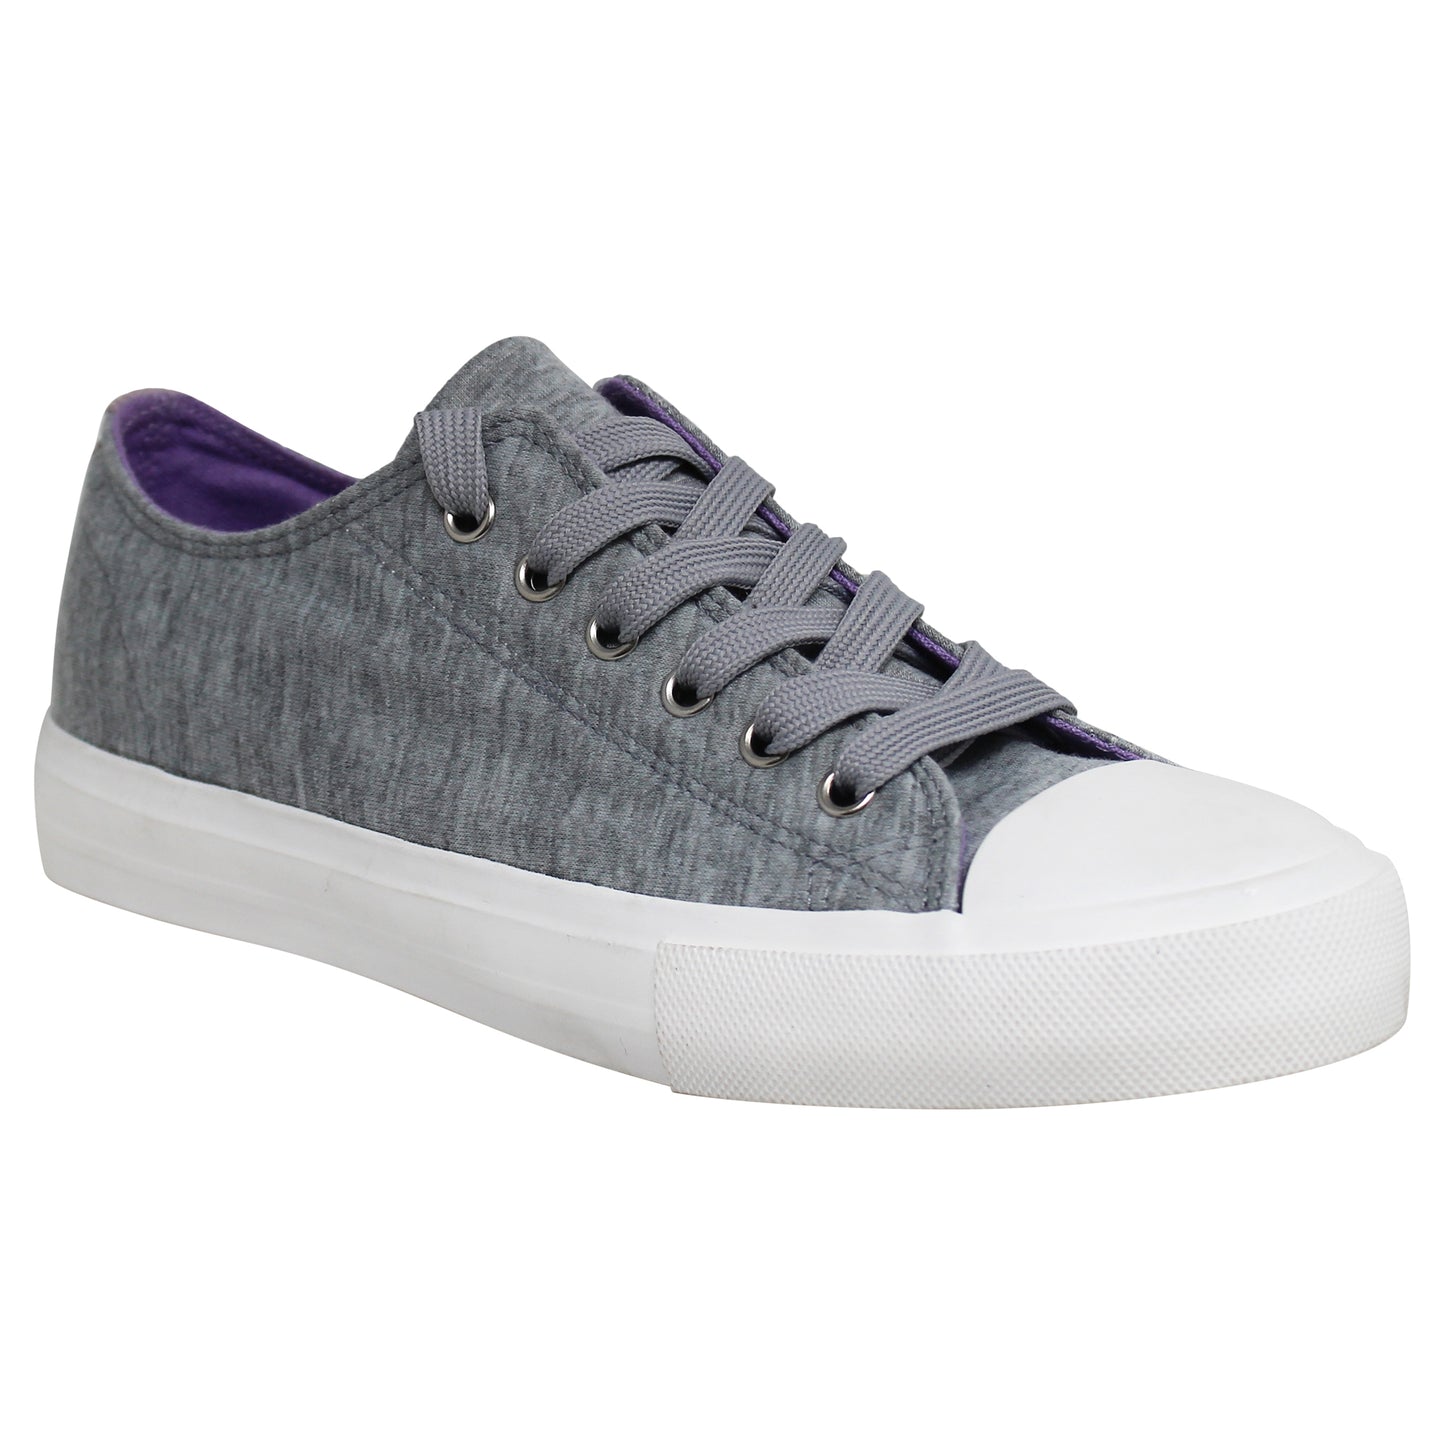 SOBEYO Sneakers Canvas Lace-Up Low Top Memory Foam Cushion